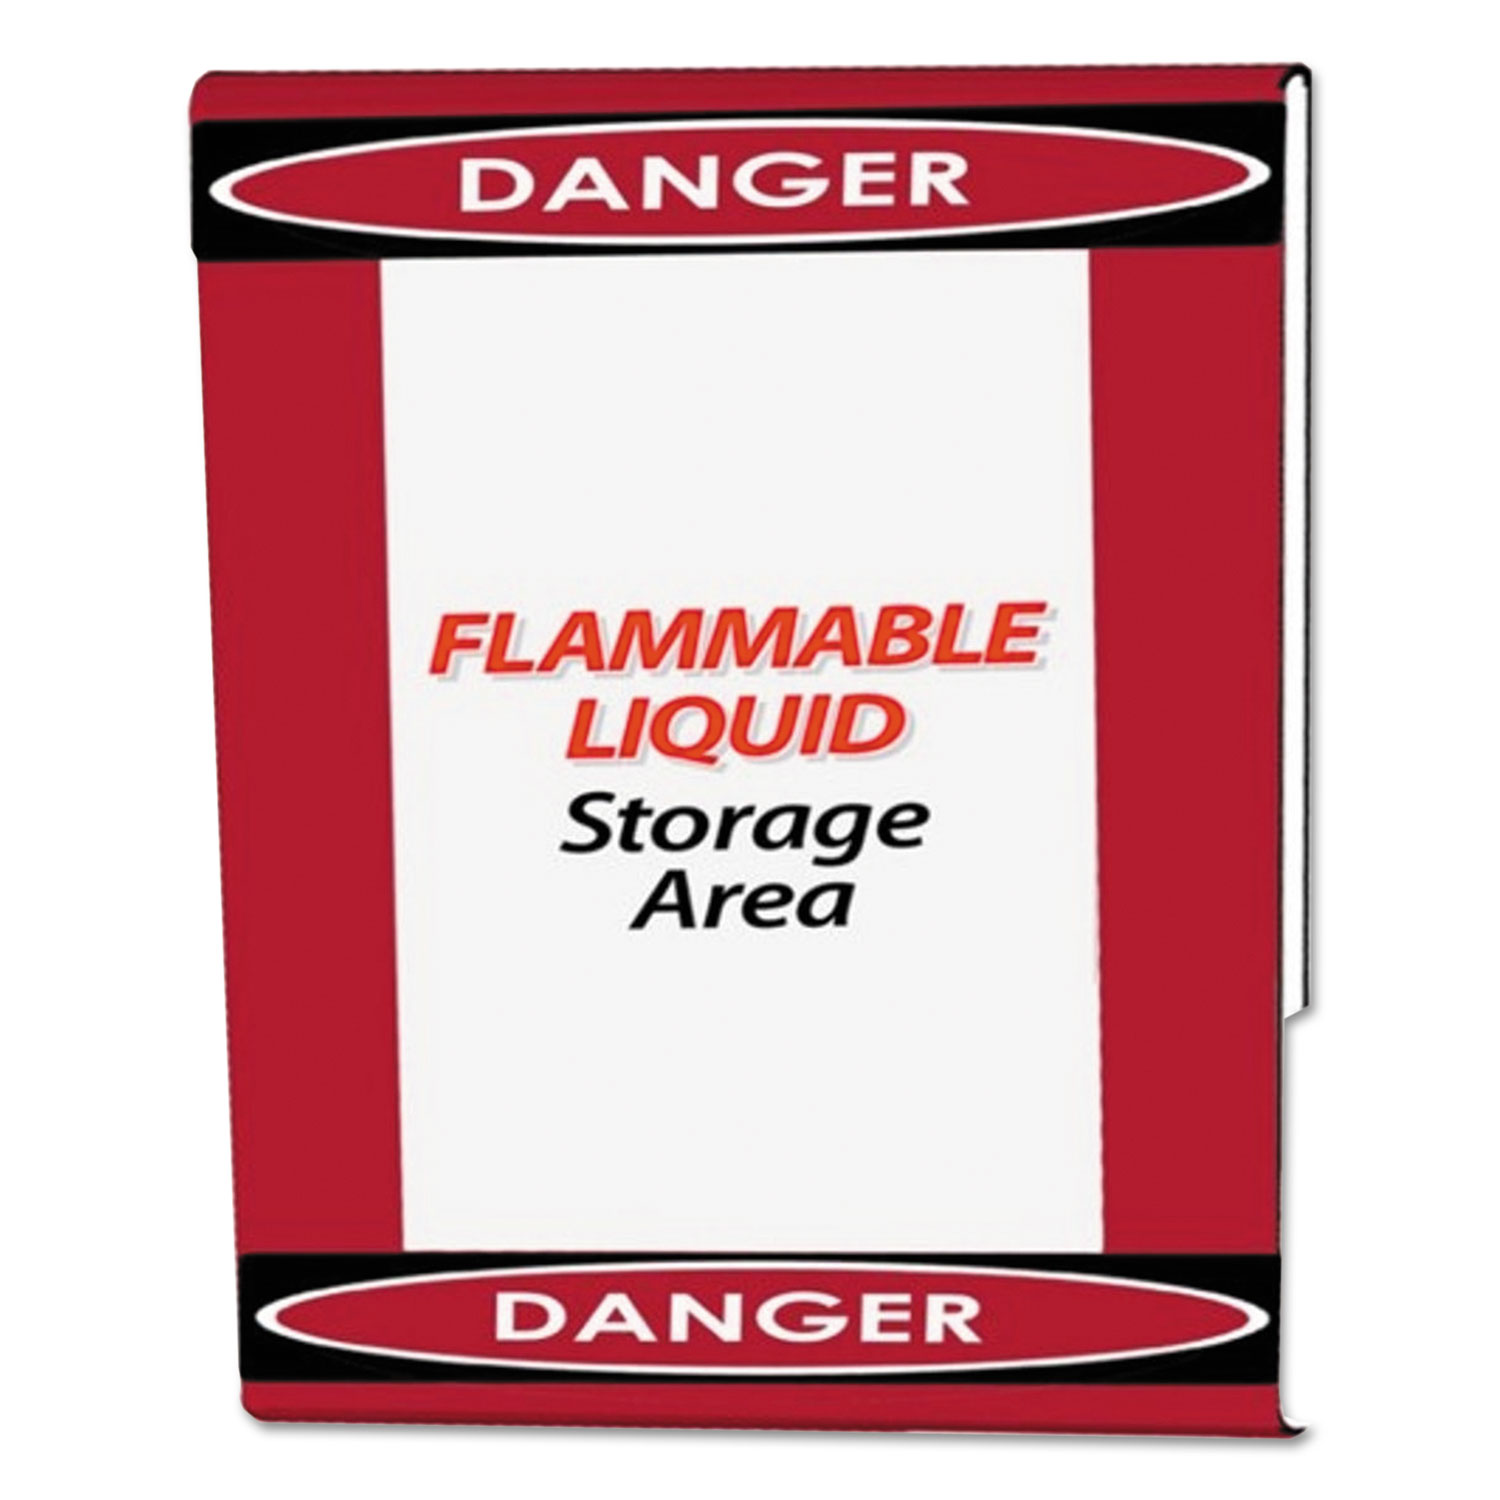 Themed Danger Border Sign Holder, Wall Mount, Top, Red/Black/Clear, 8 1/2 x 11